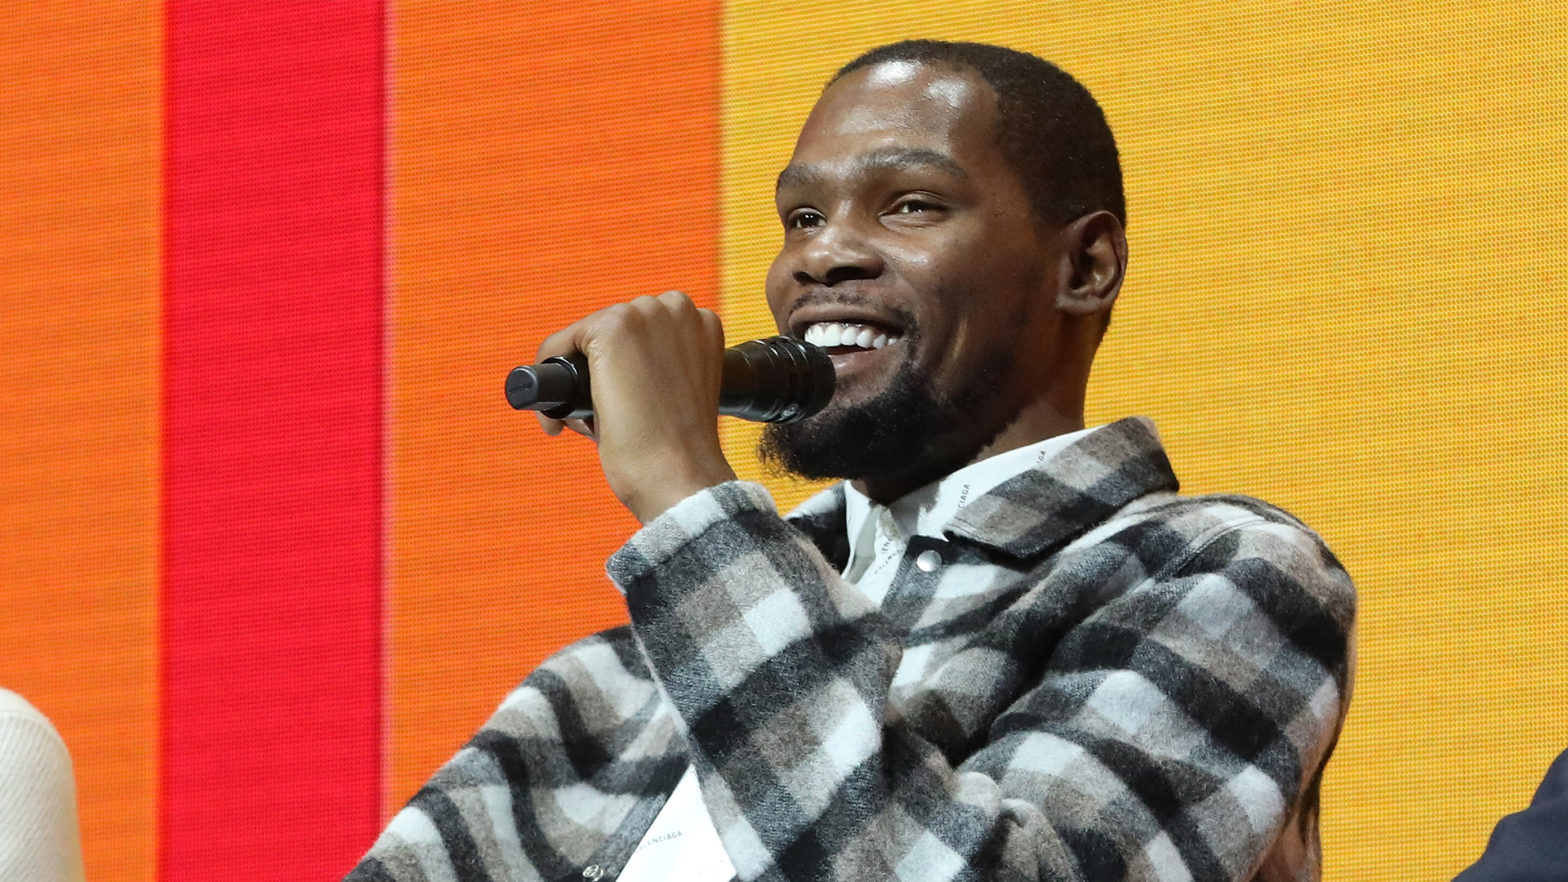 Kevin Durant's Thirty Five Ventures Could Score Big After Investing In WHOOP, A Company Valued At $3.6B